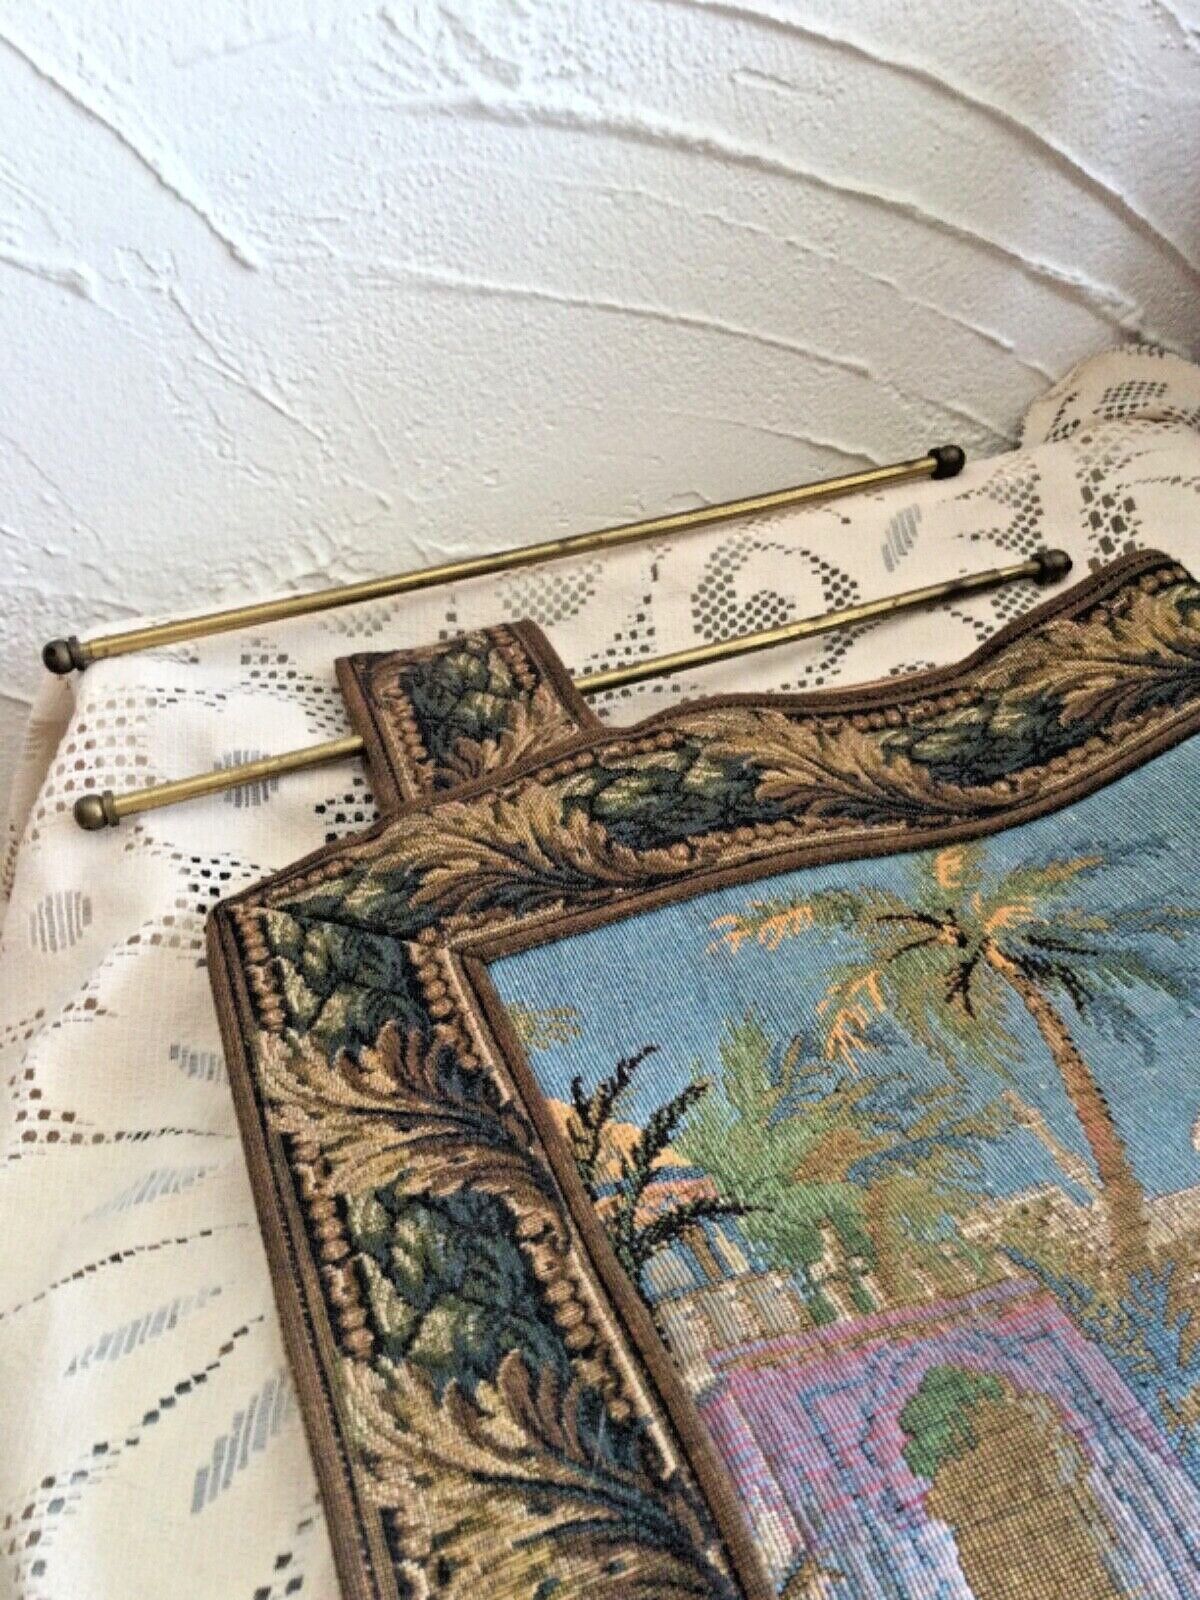 2 VINTAGE FRENCH BRASS EXTENDING CURTAIN RODS CAFE, KITCHEN BATHROOM TAPESTRY 1